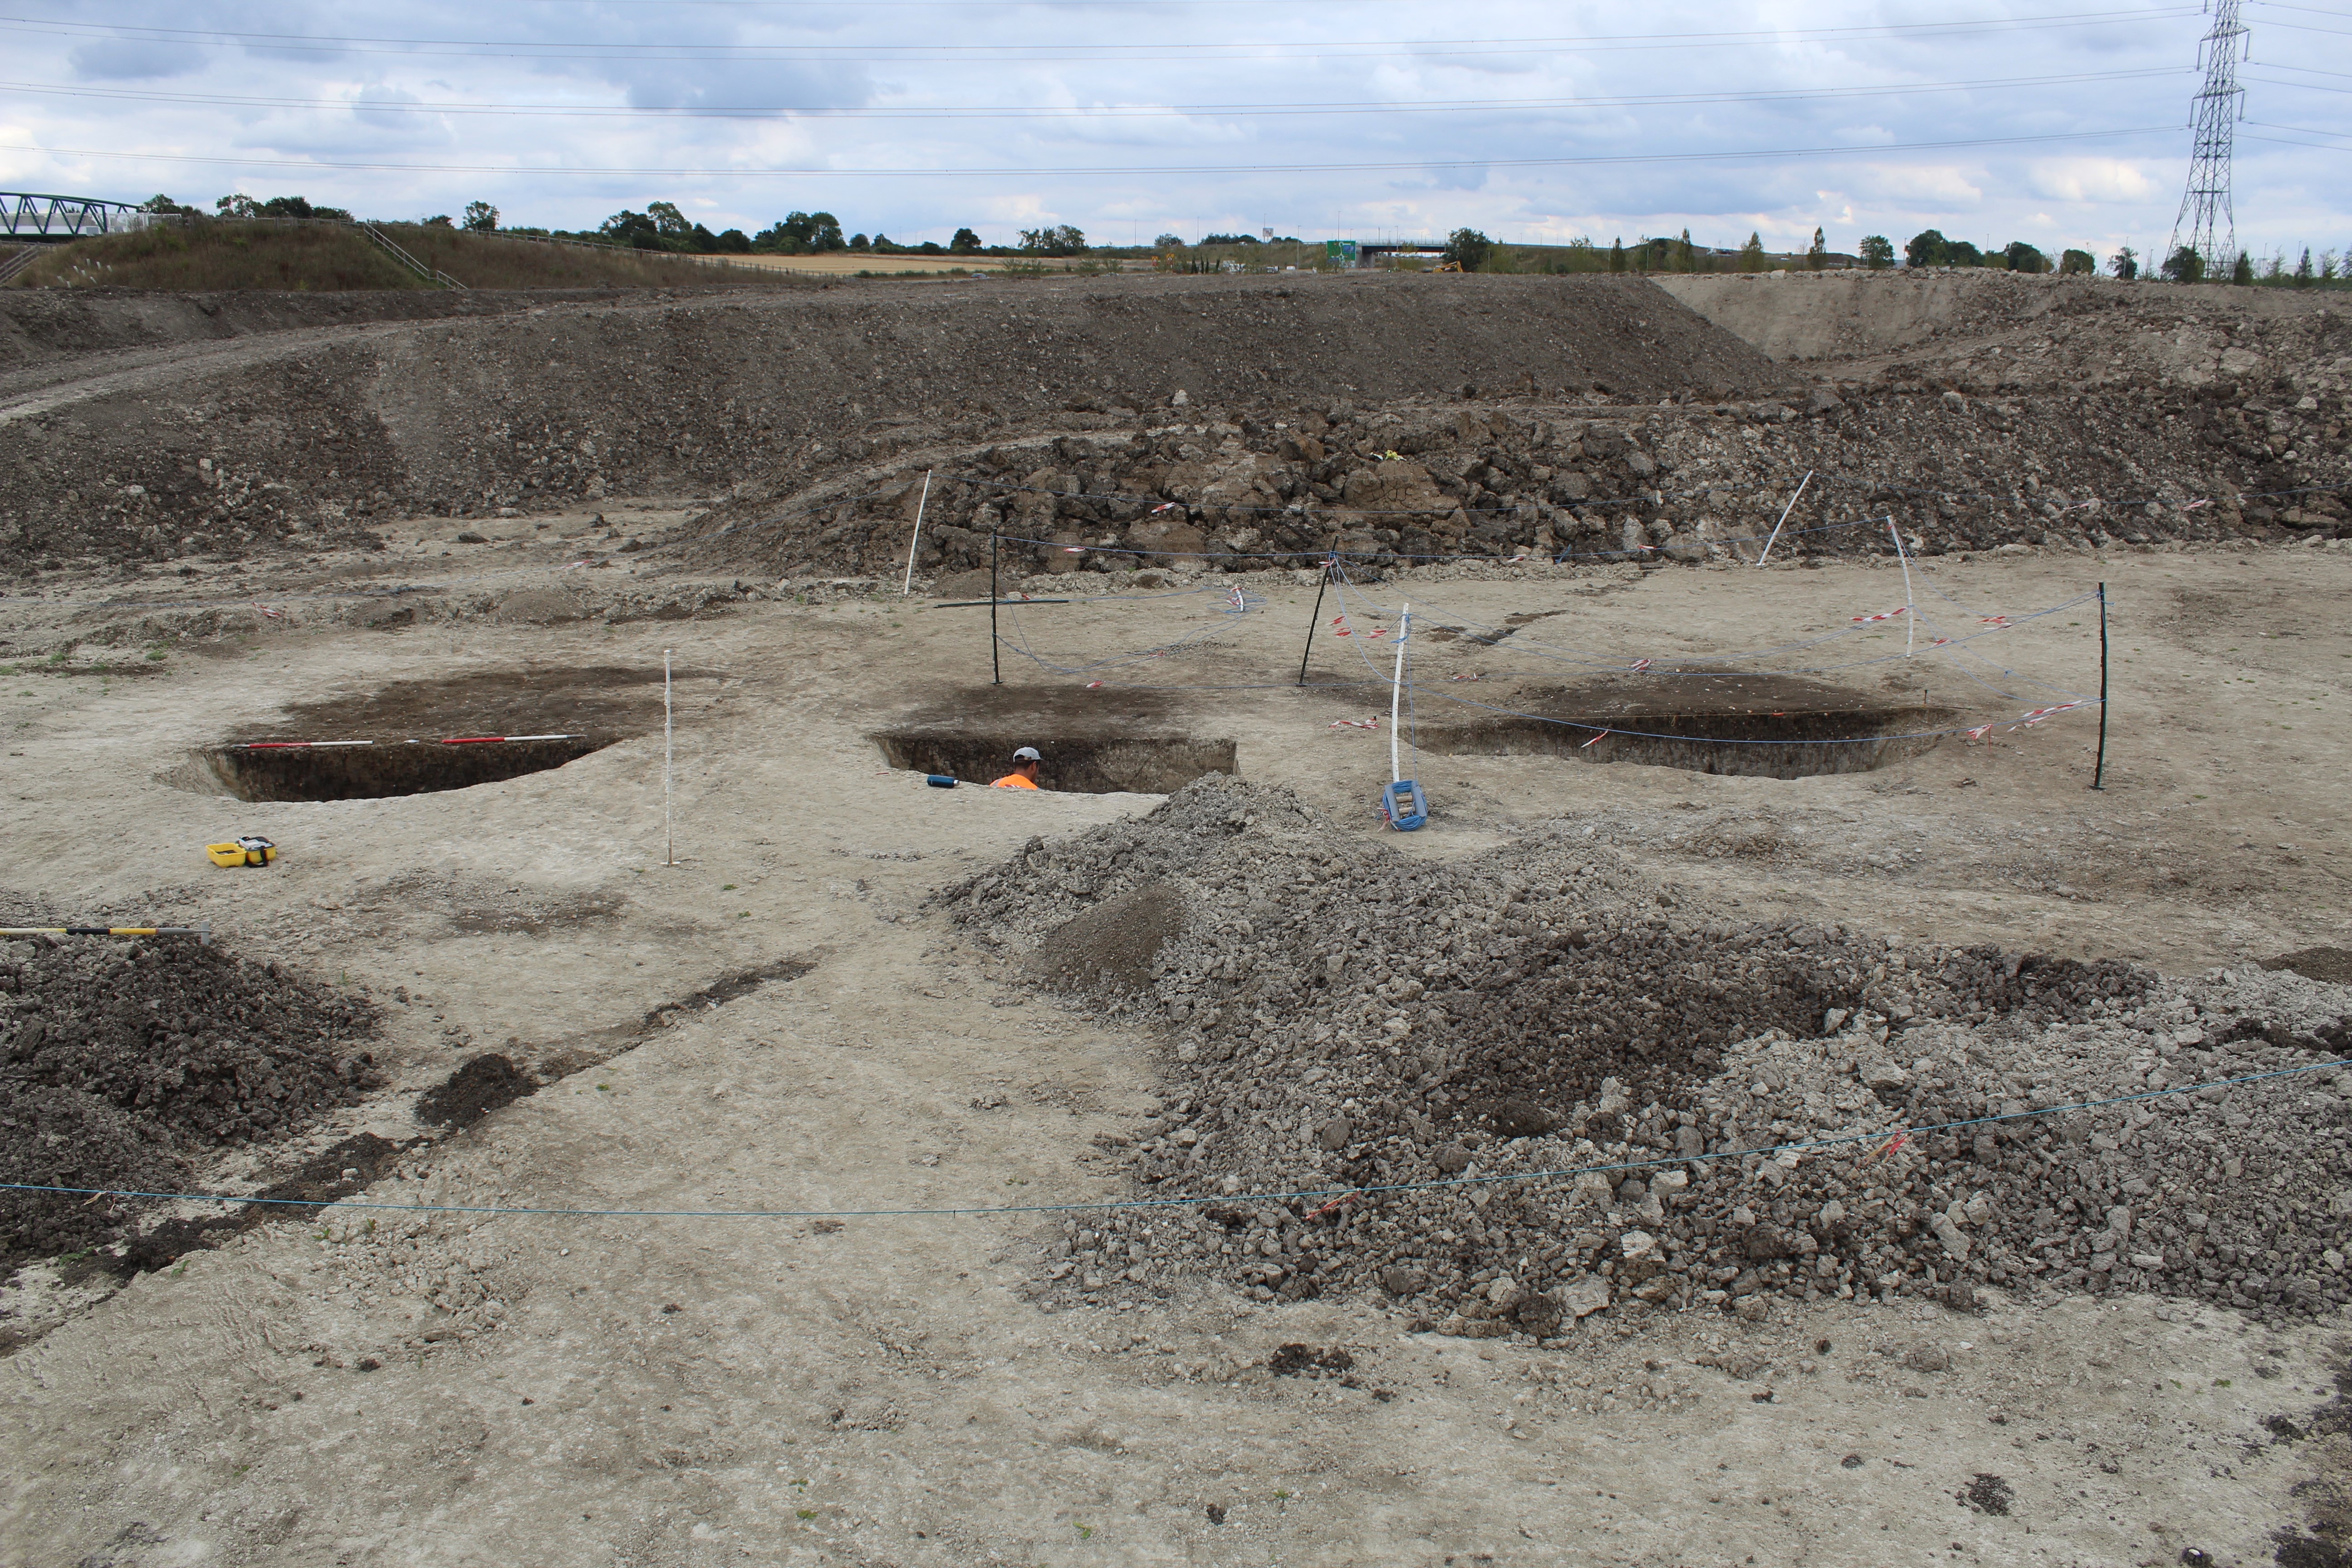 A photo of the excavation site in Bedfordshire, England, showing three pits